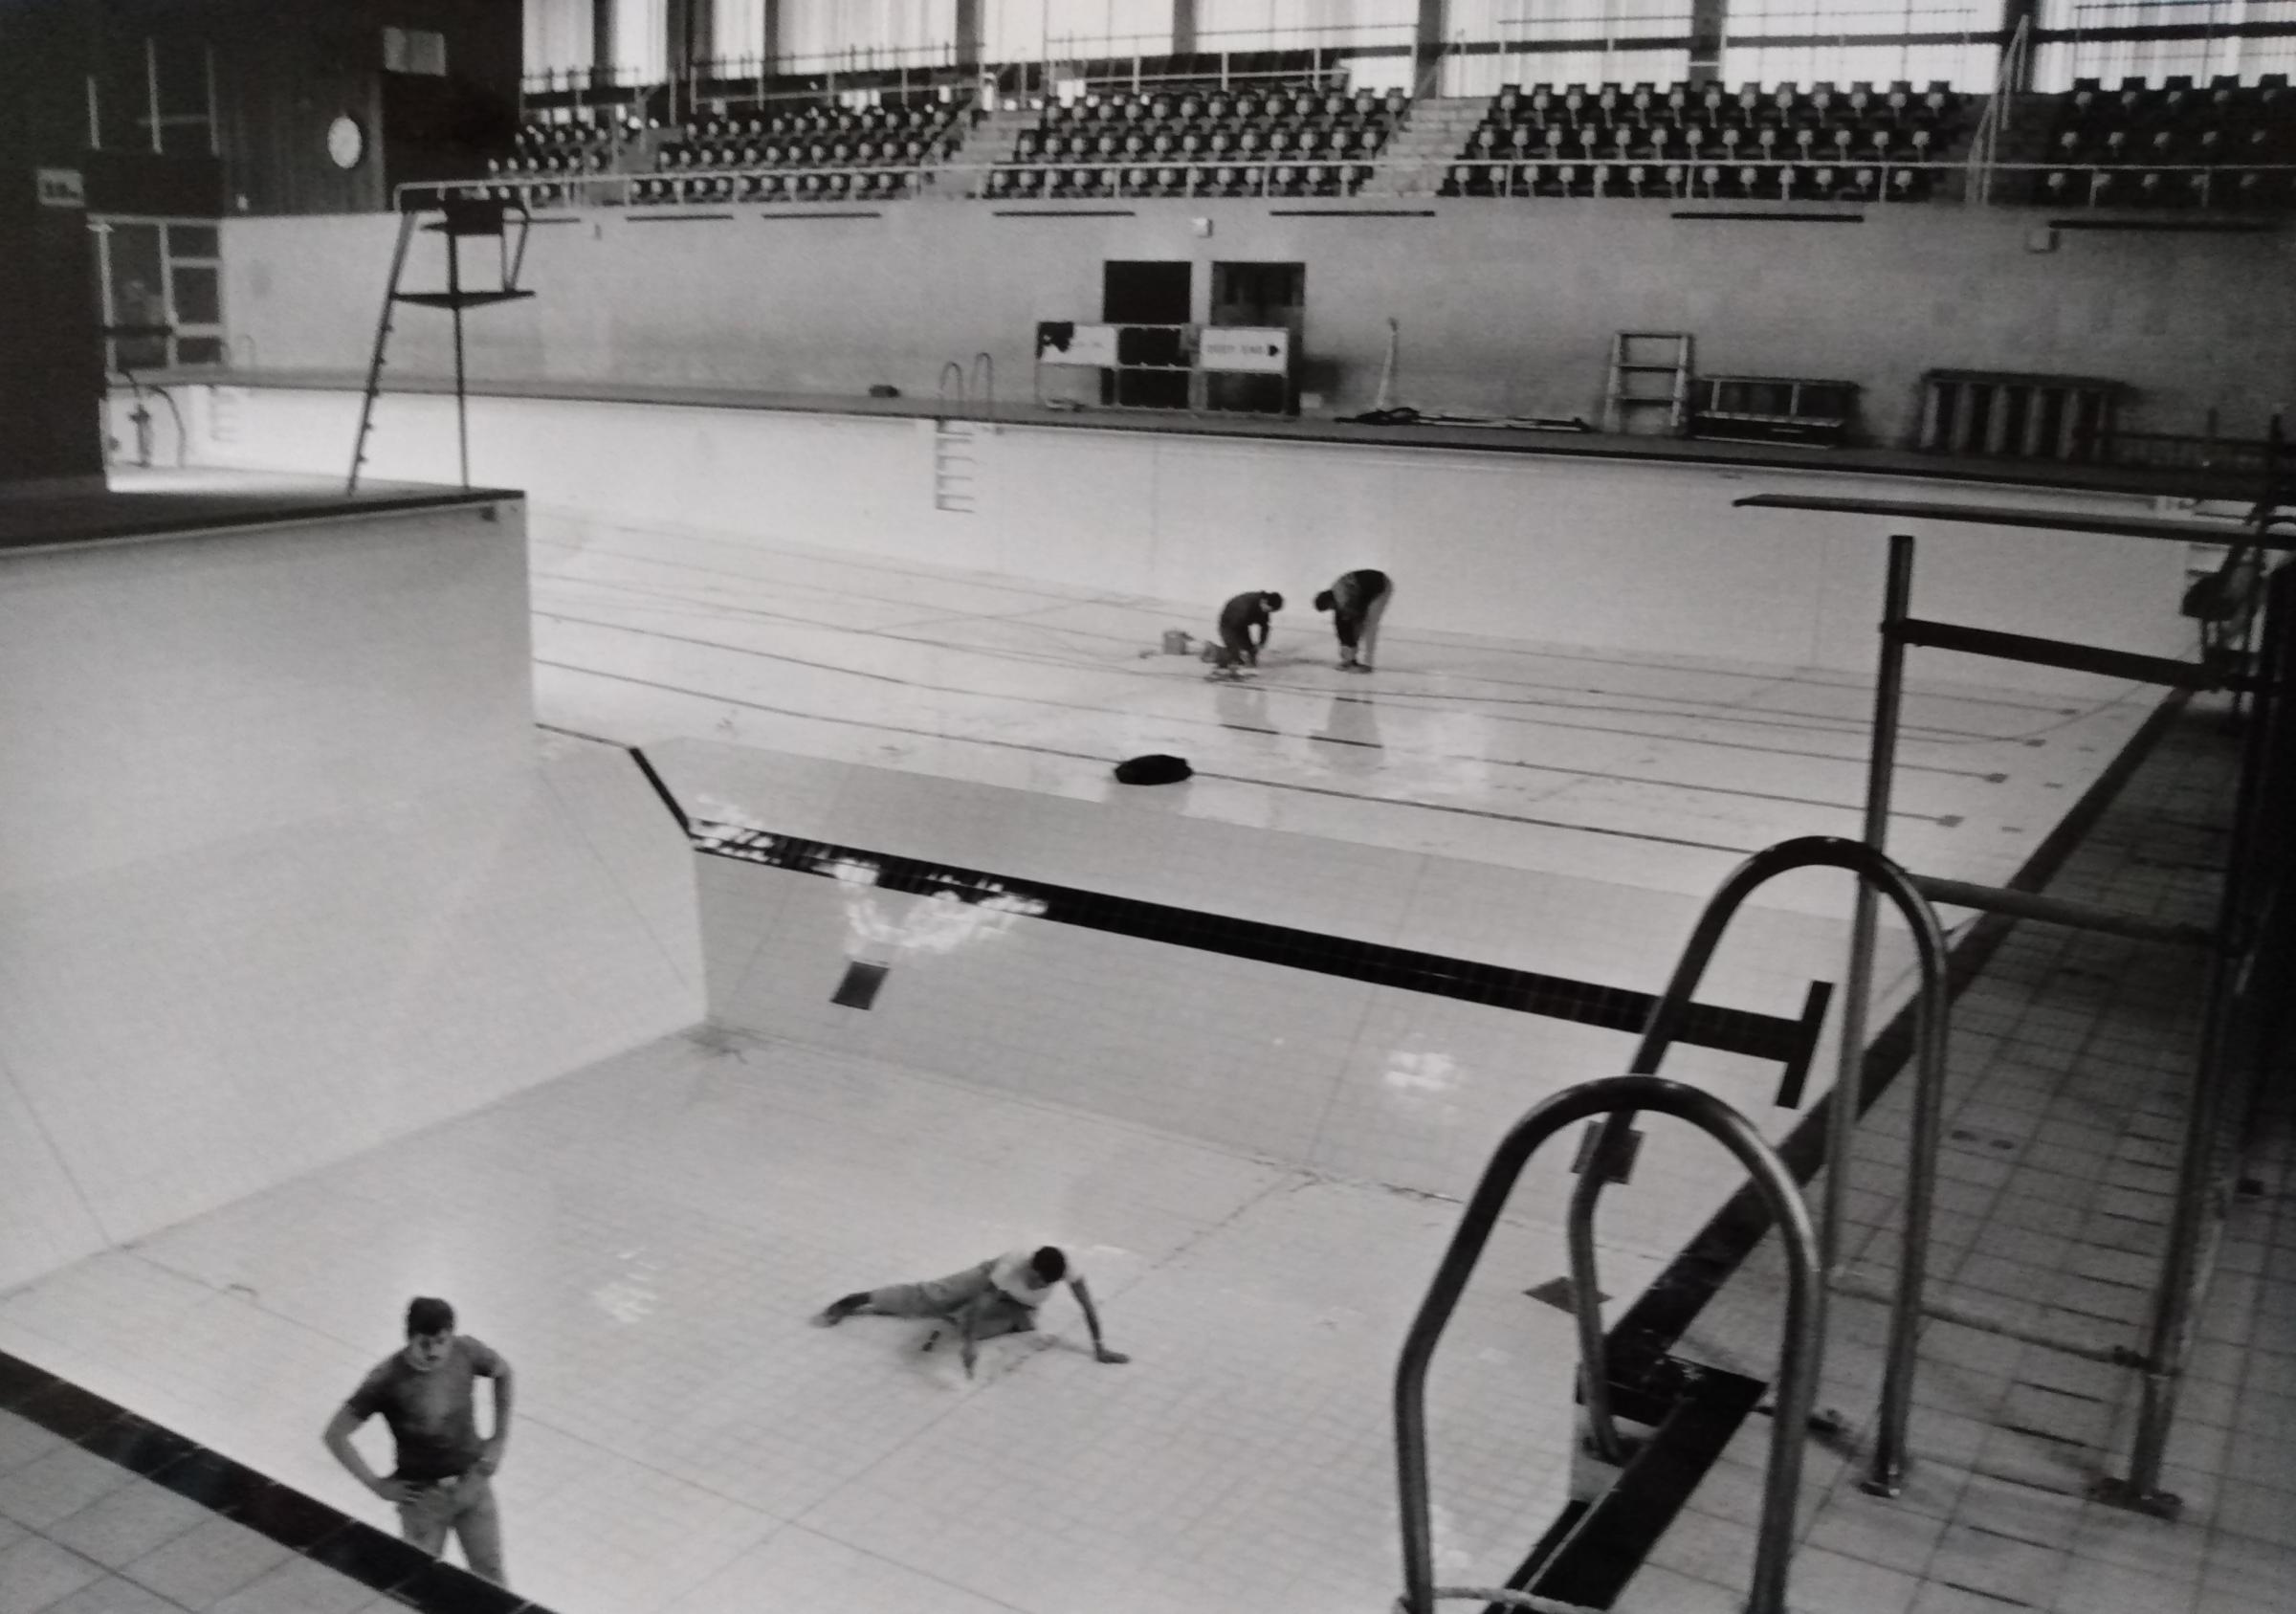 January 1988 and the plug was pulled on the baths to allow workmen to carry out repairs during a £100,000 facelift